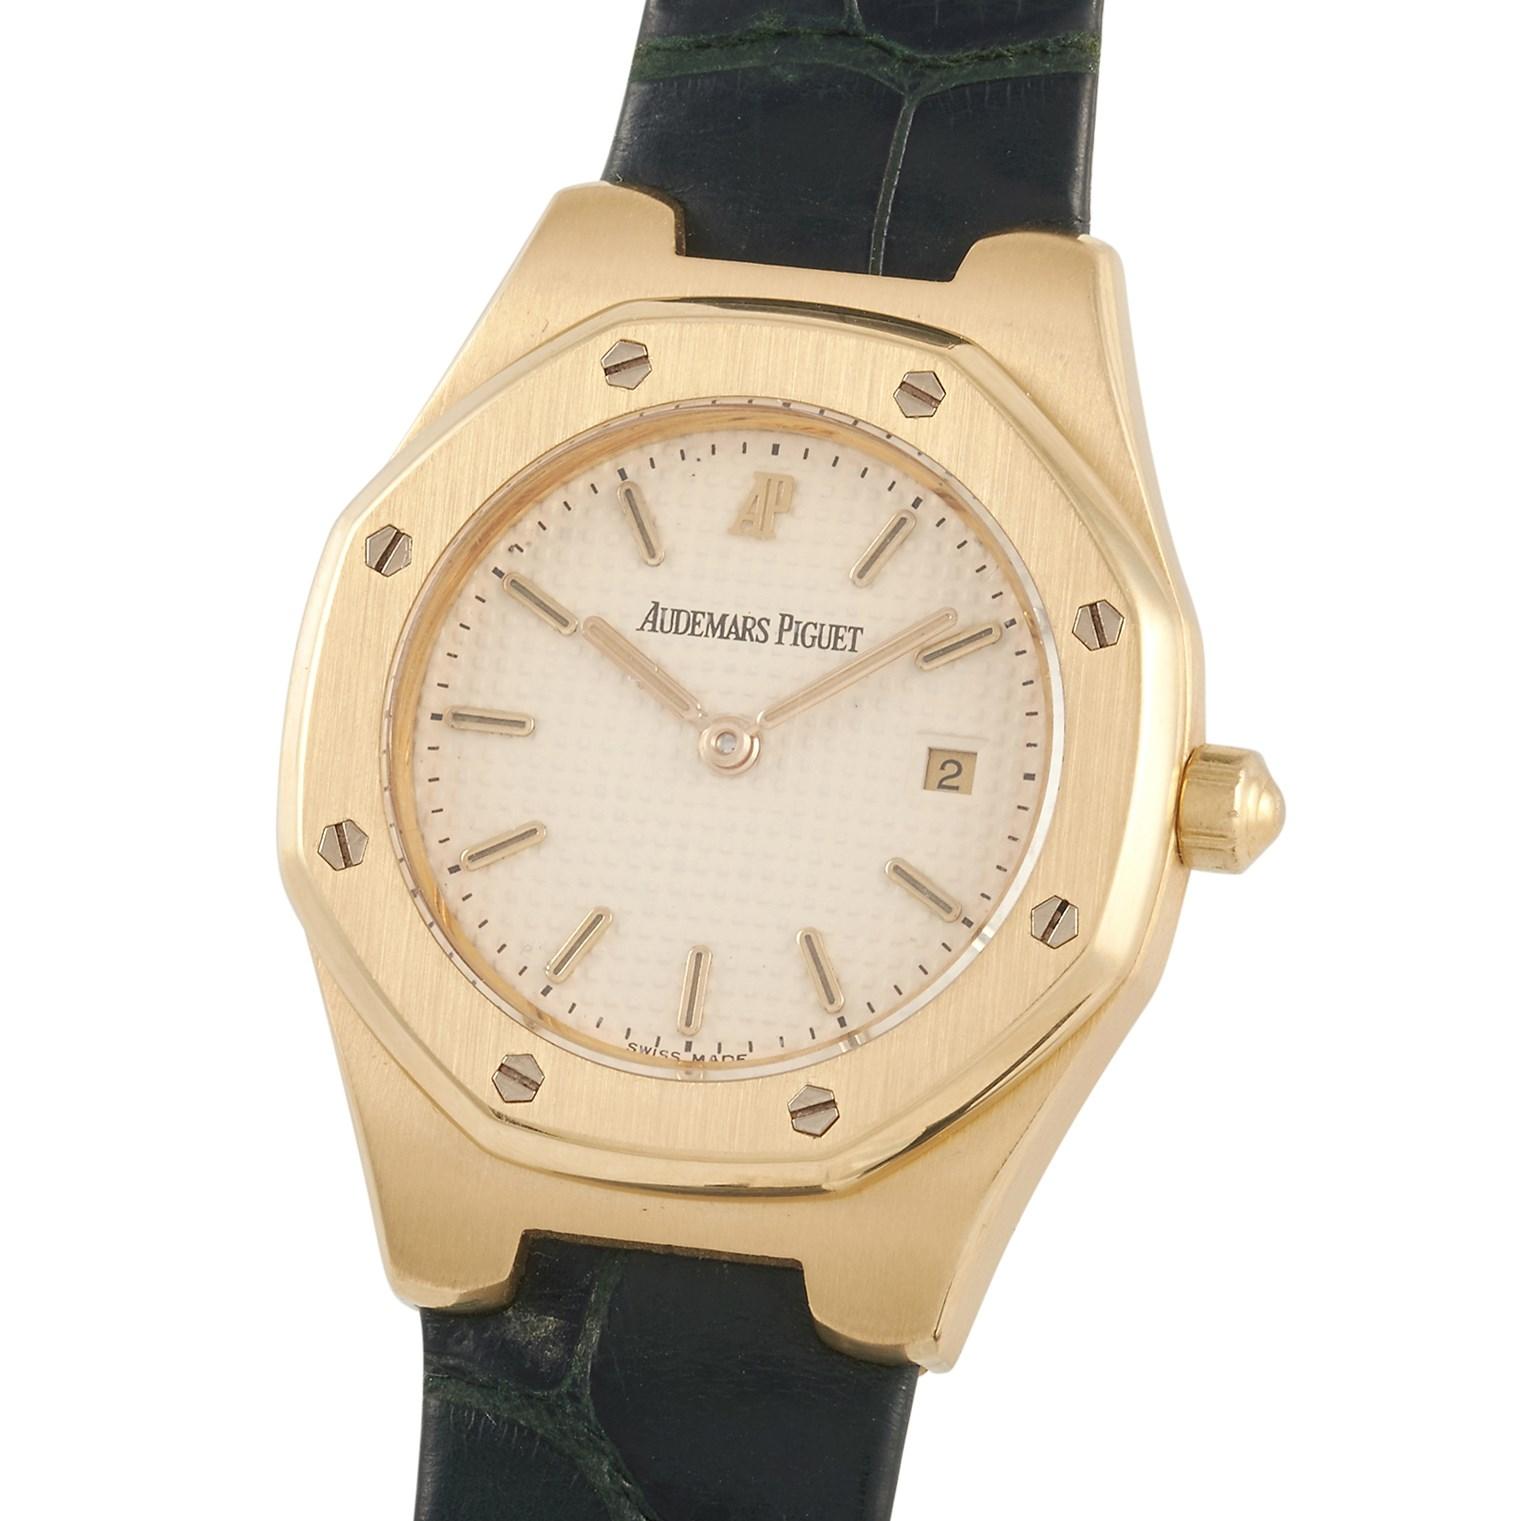 A lady's watch with a timeless appeal, the Audemars Piguet Vintage Lady Royal Oak Women's Watch features a solid 18K yellow gold case in brushed finish. Present is the iconic hexagonal bezel secured by 8 steel screws. On the cream Tapisserie dial